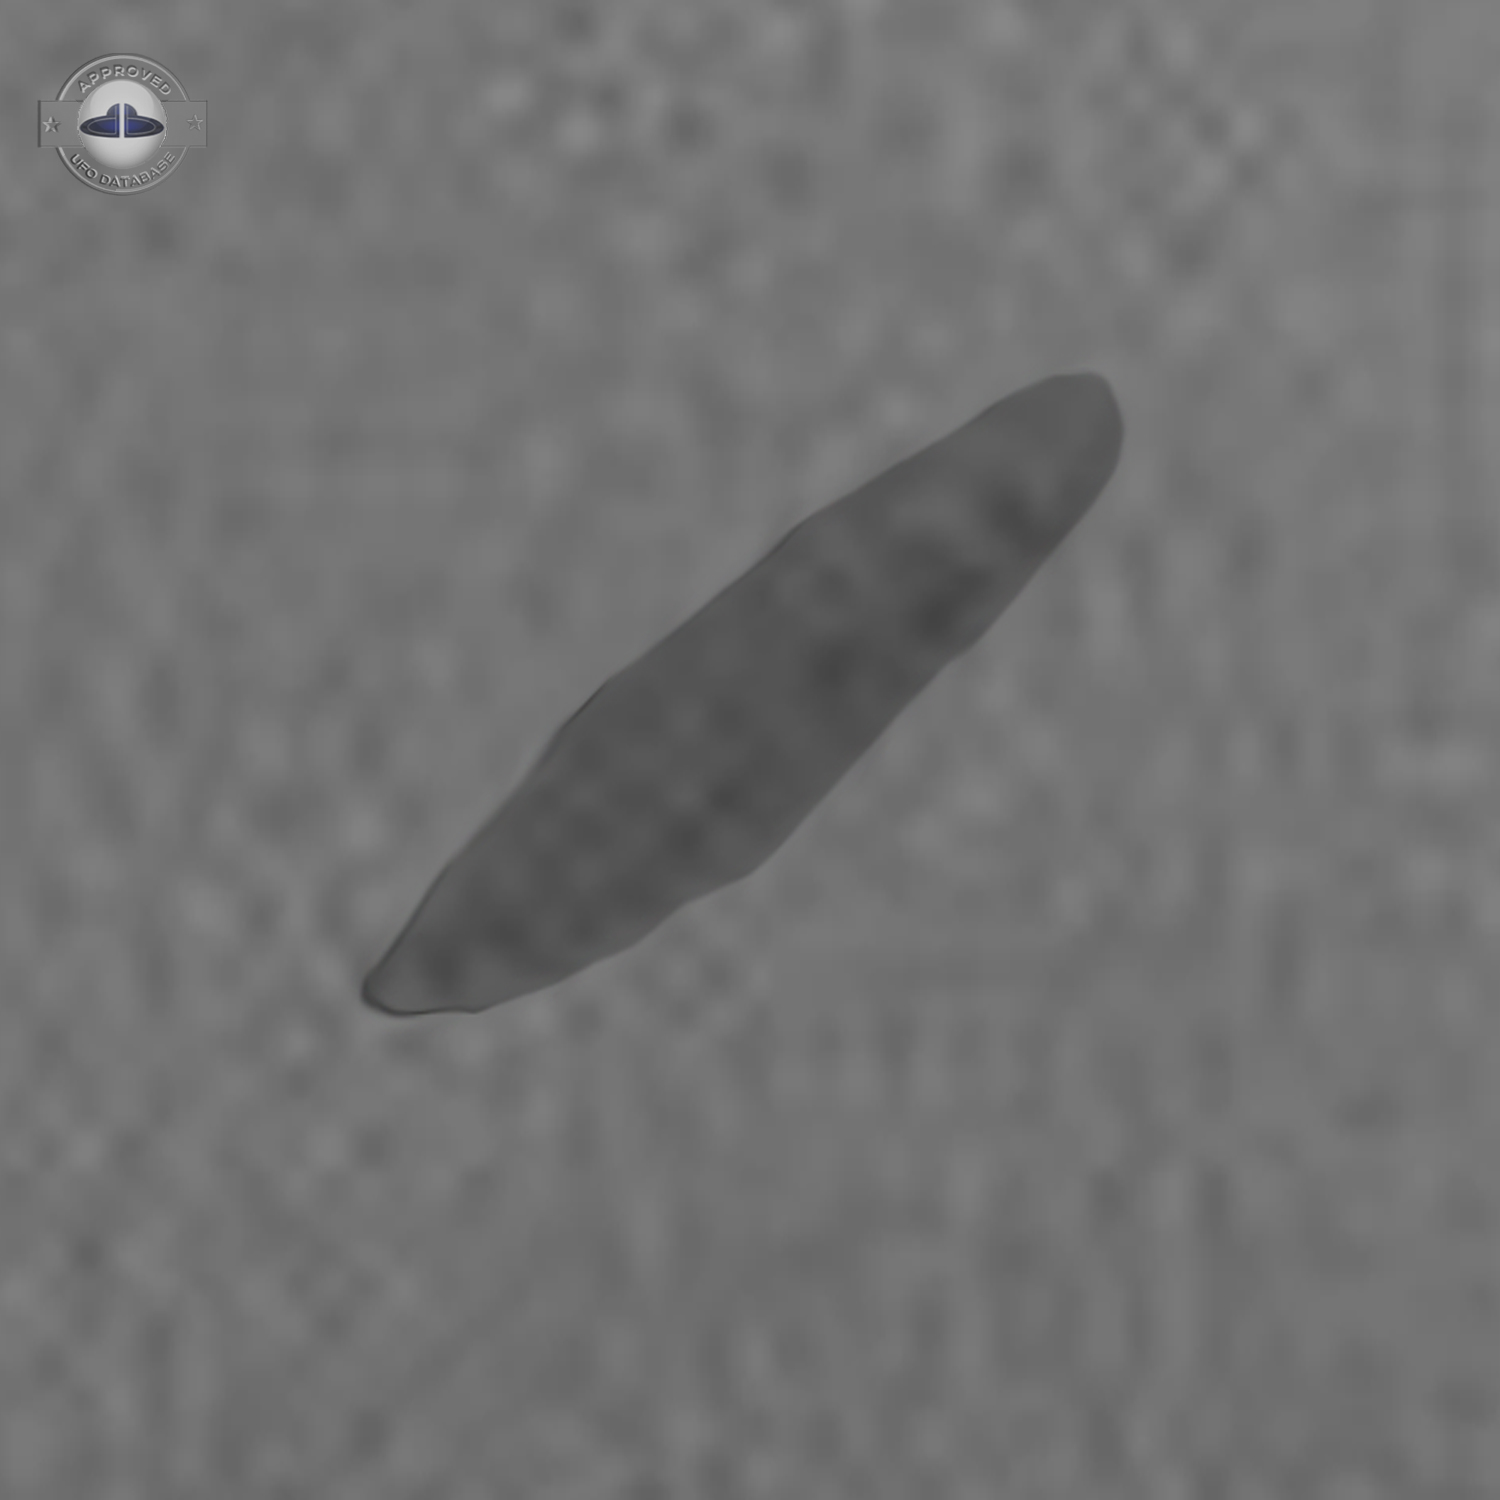 Live Cam capture of UFO USO near water surface | Geisenfeld, Germany UFO Picture #203-4